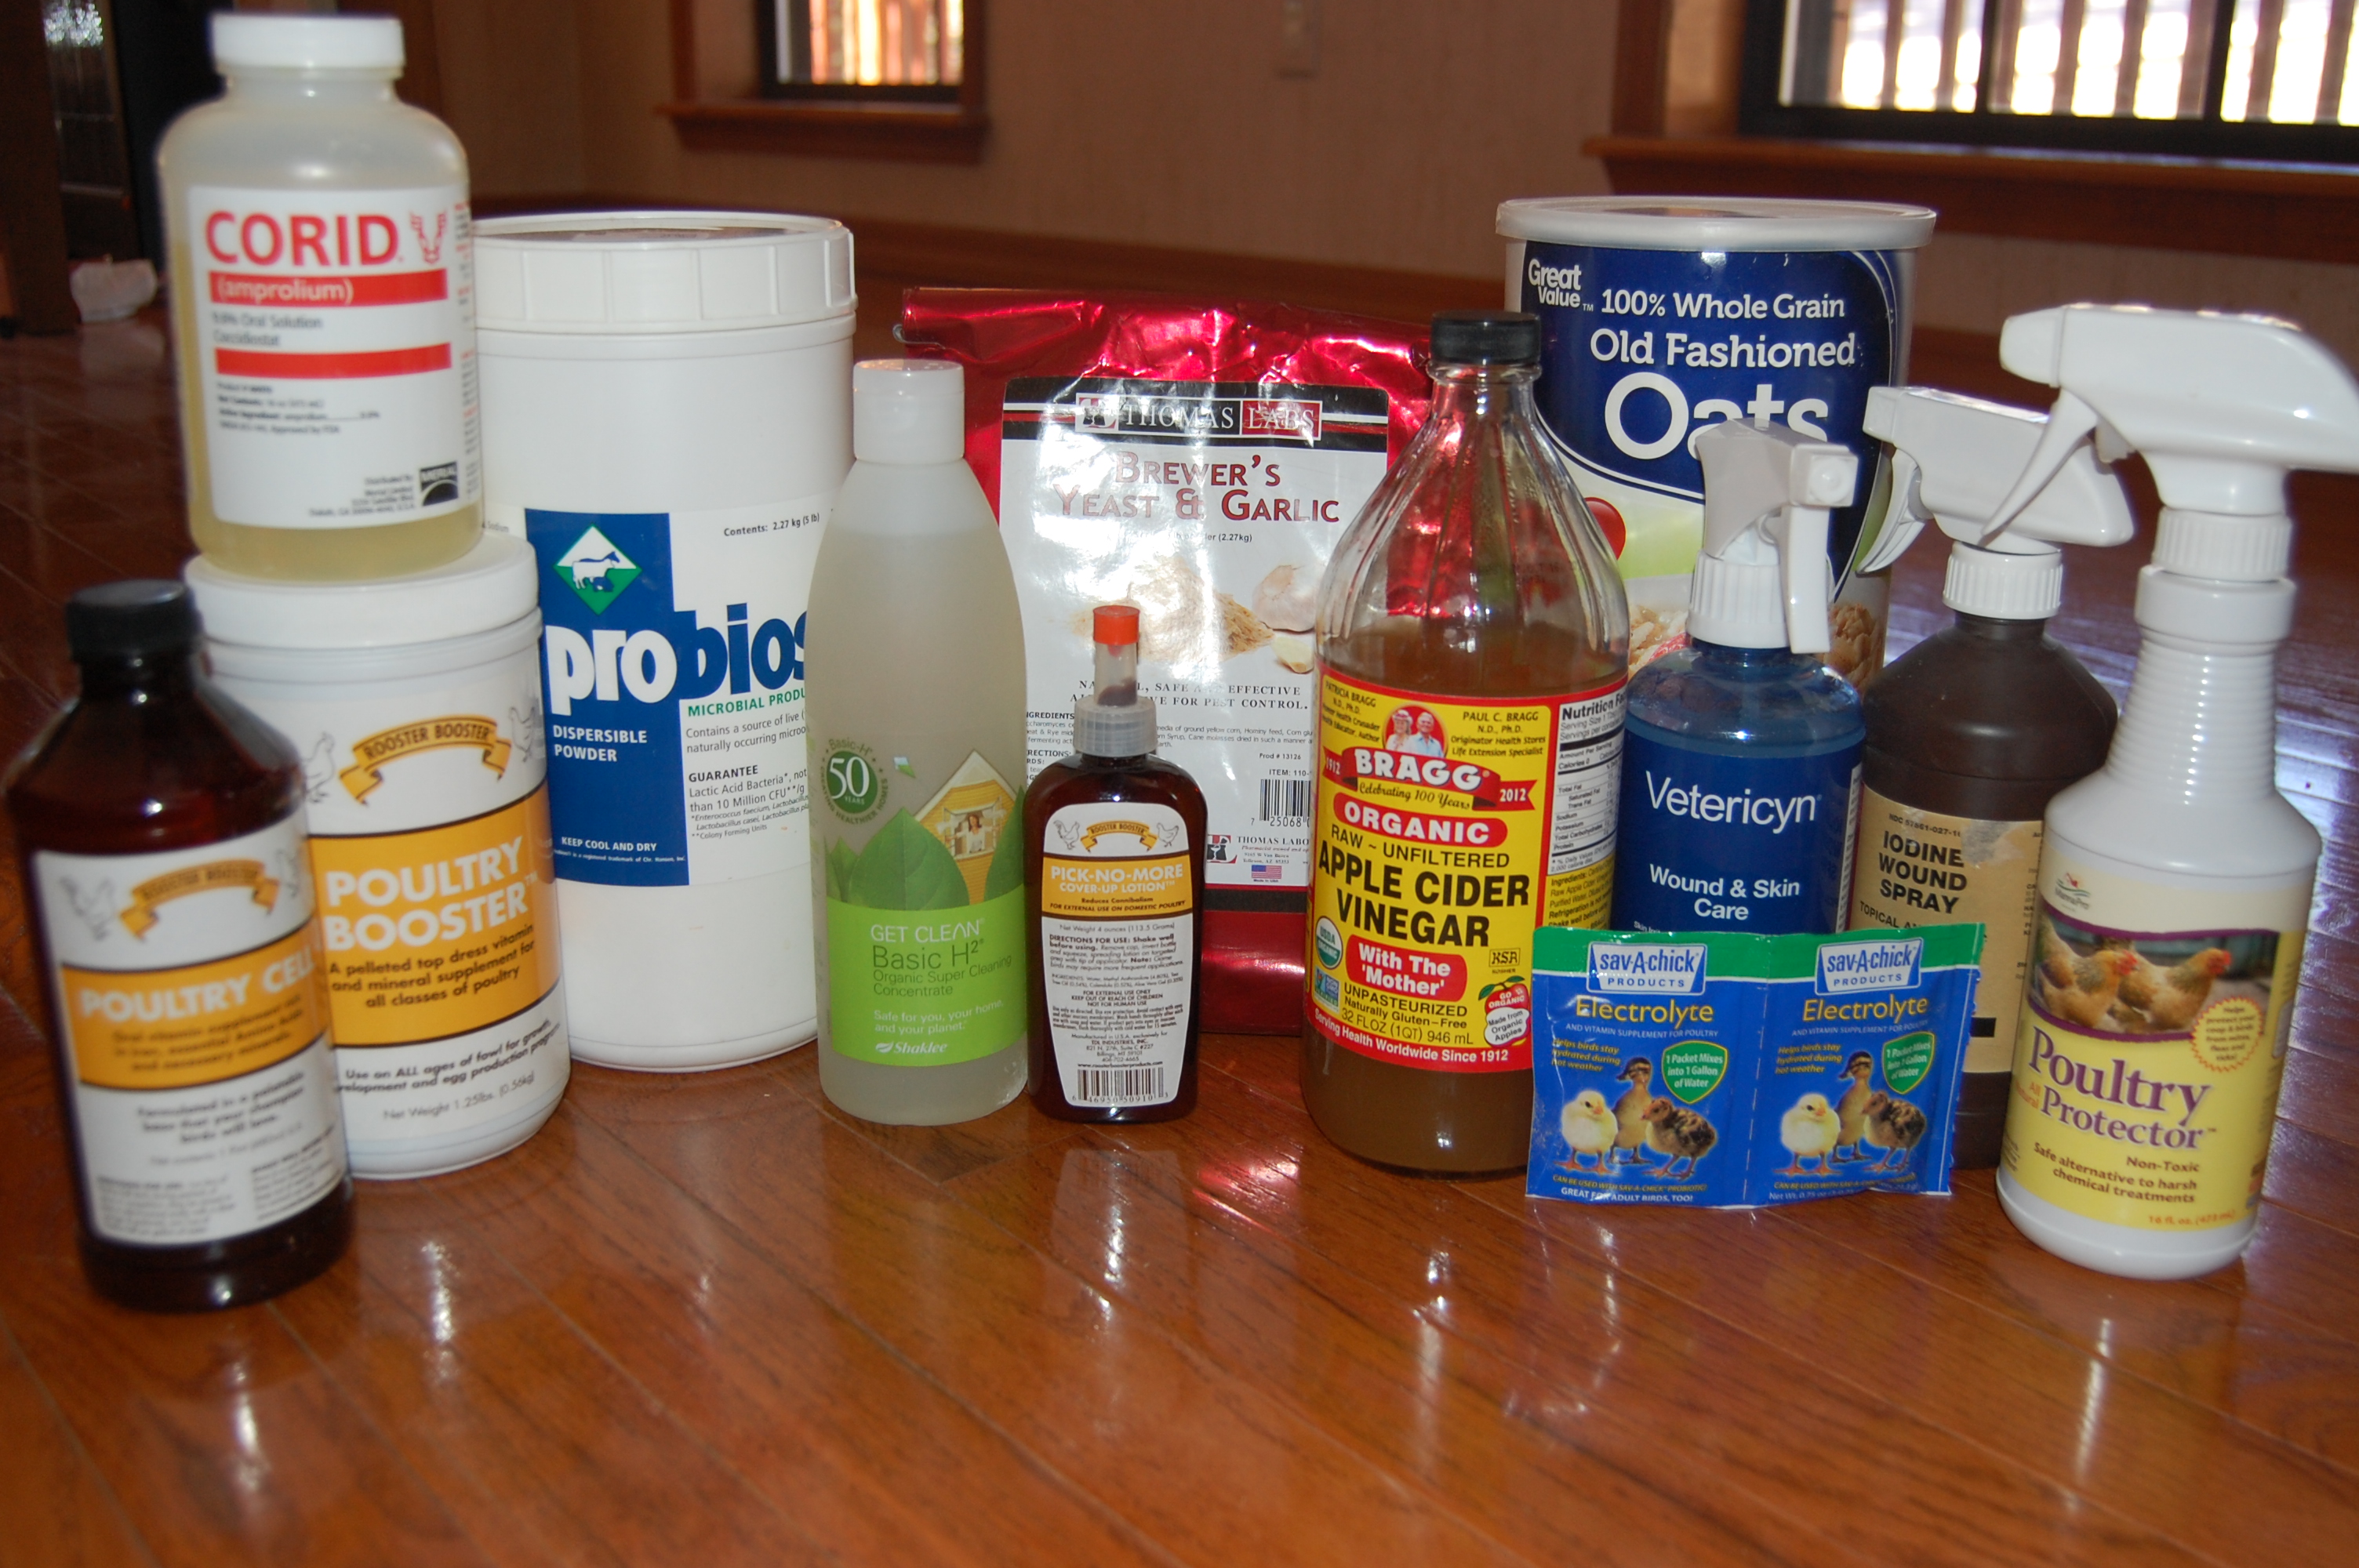 Our poultry essentials